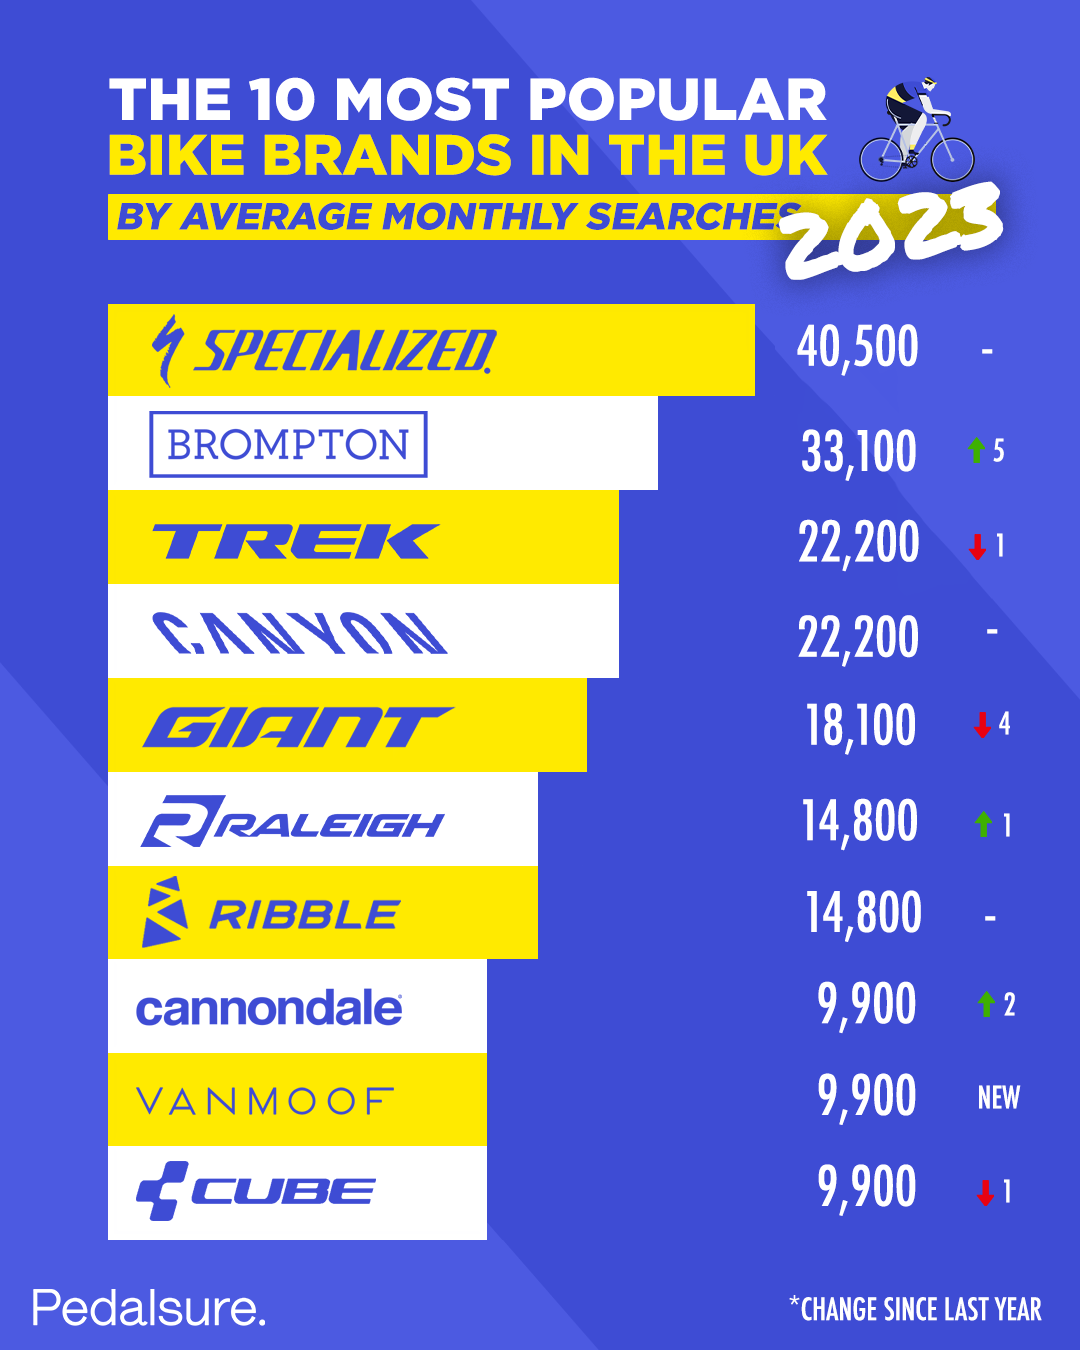 The 10 Most Popular Bike Brands In The UK